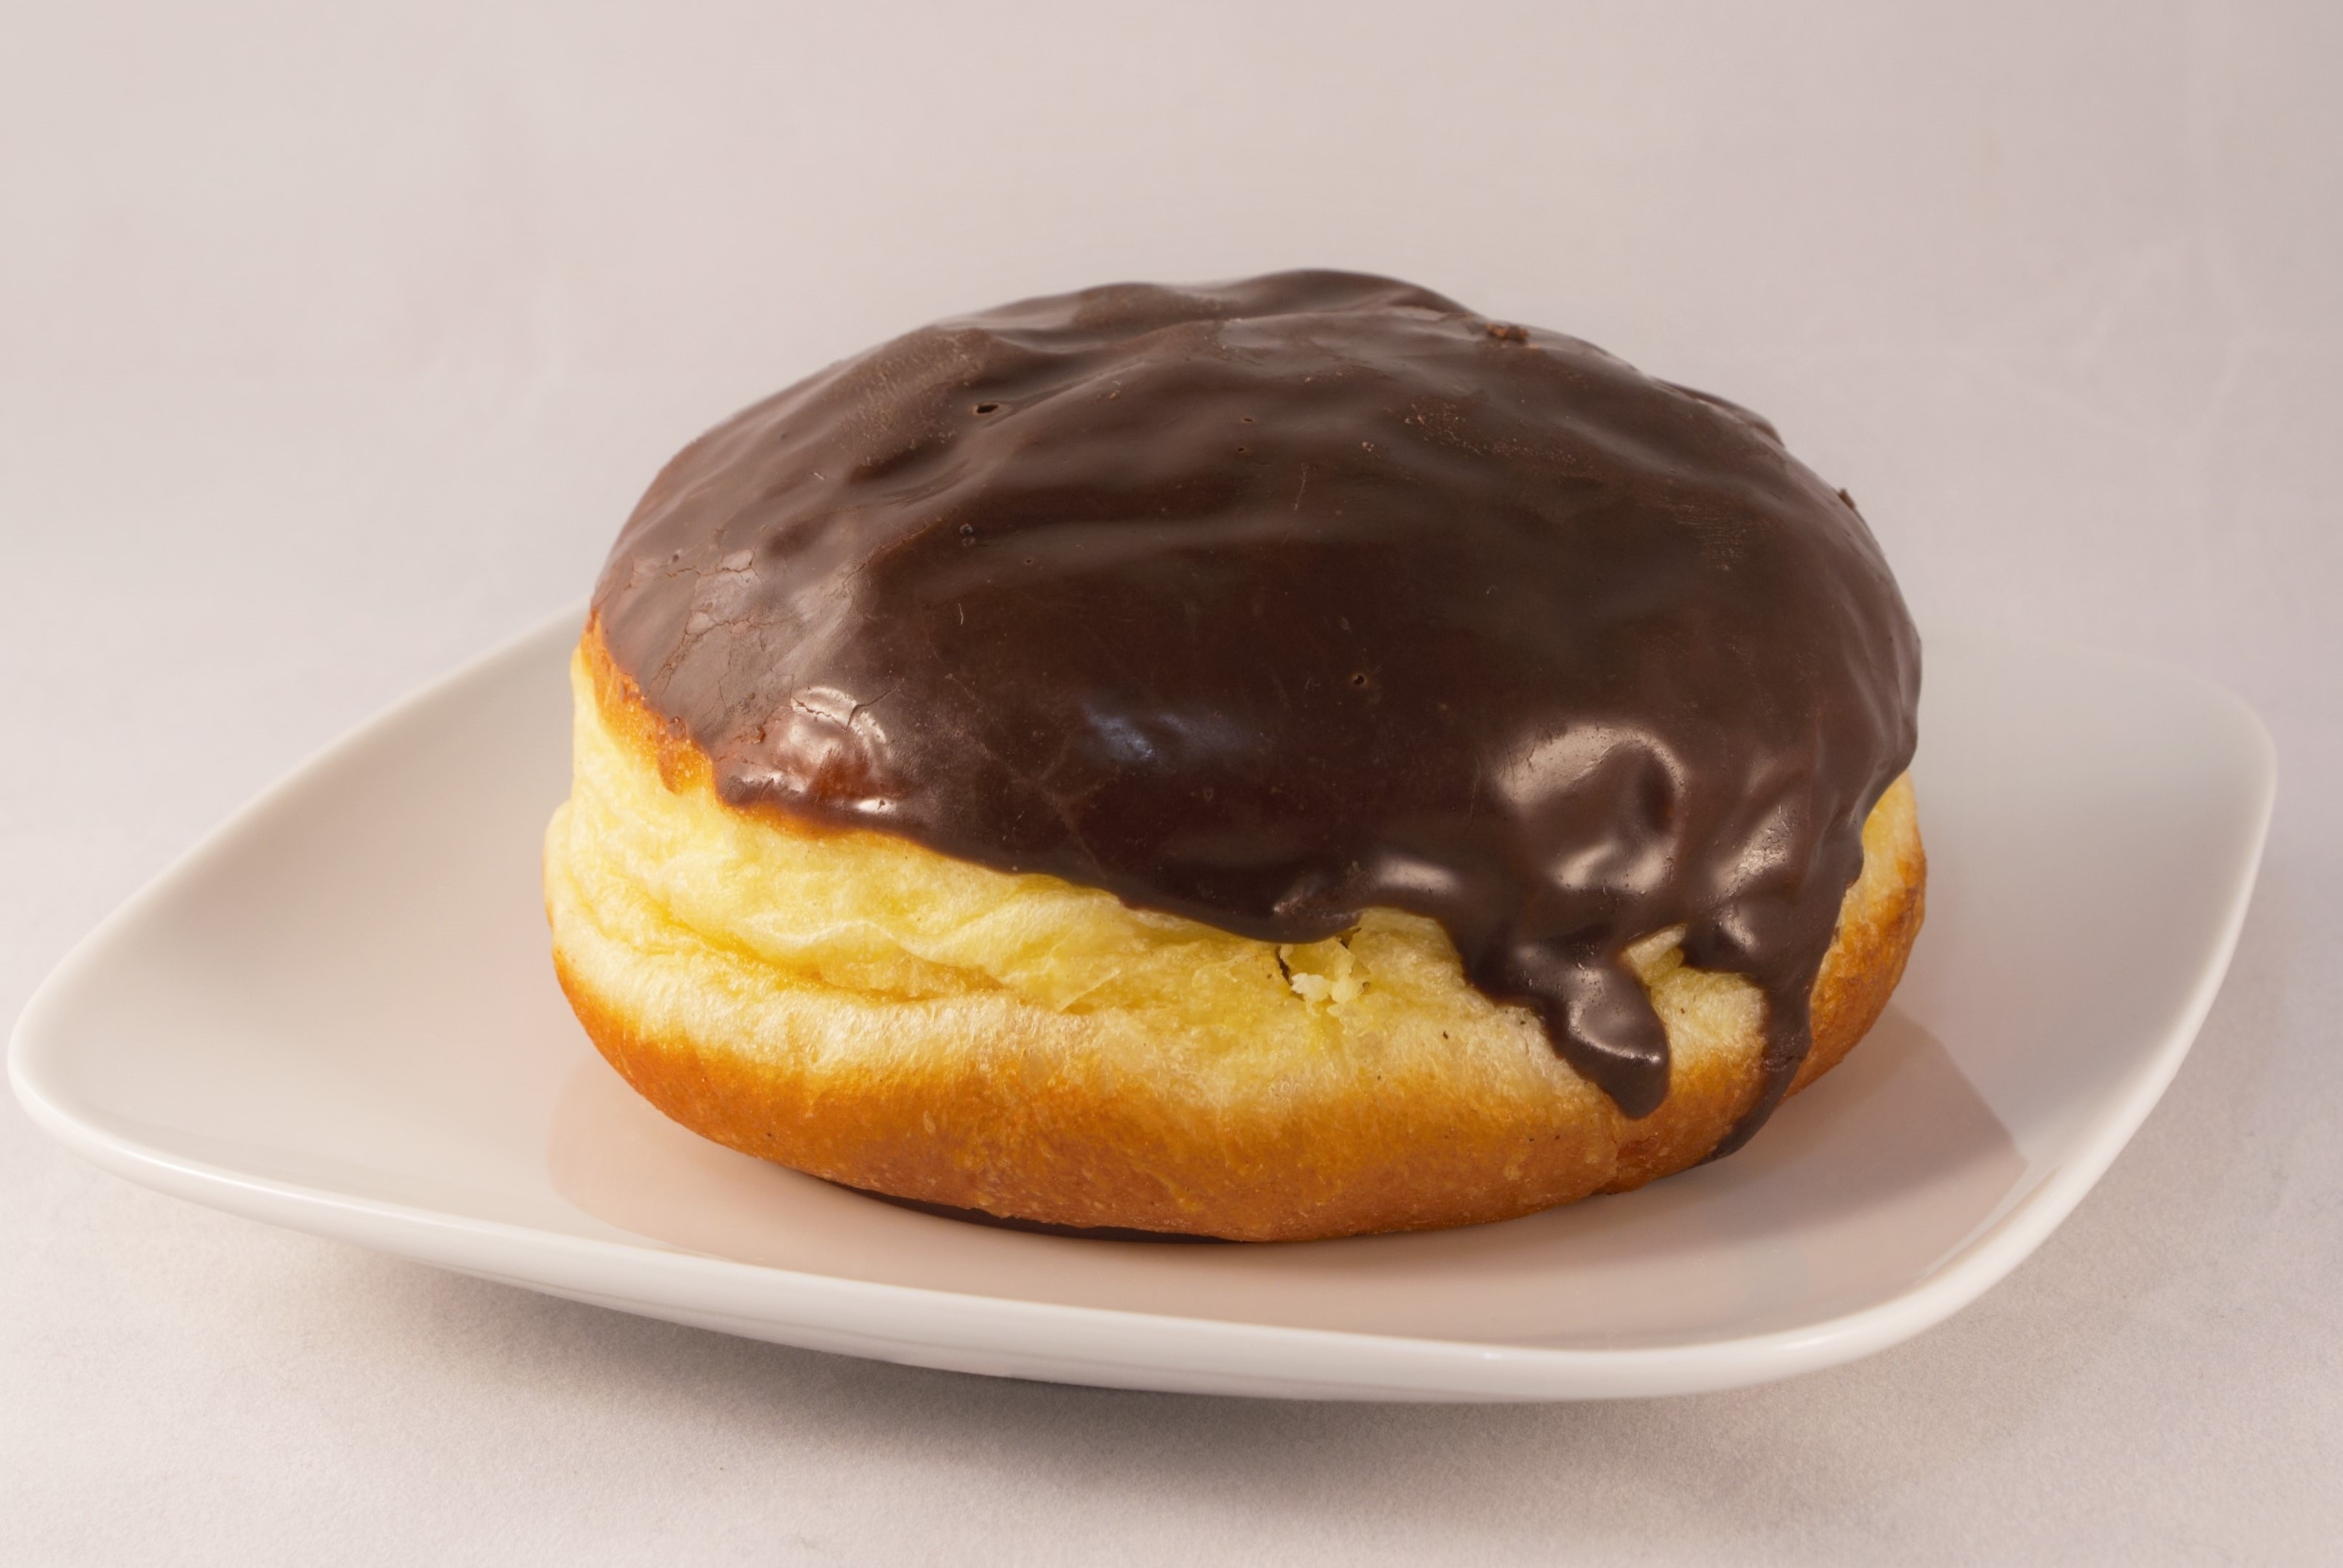 doughnut with chocolate filling